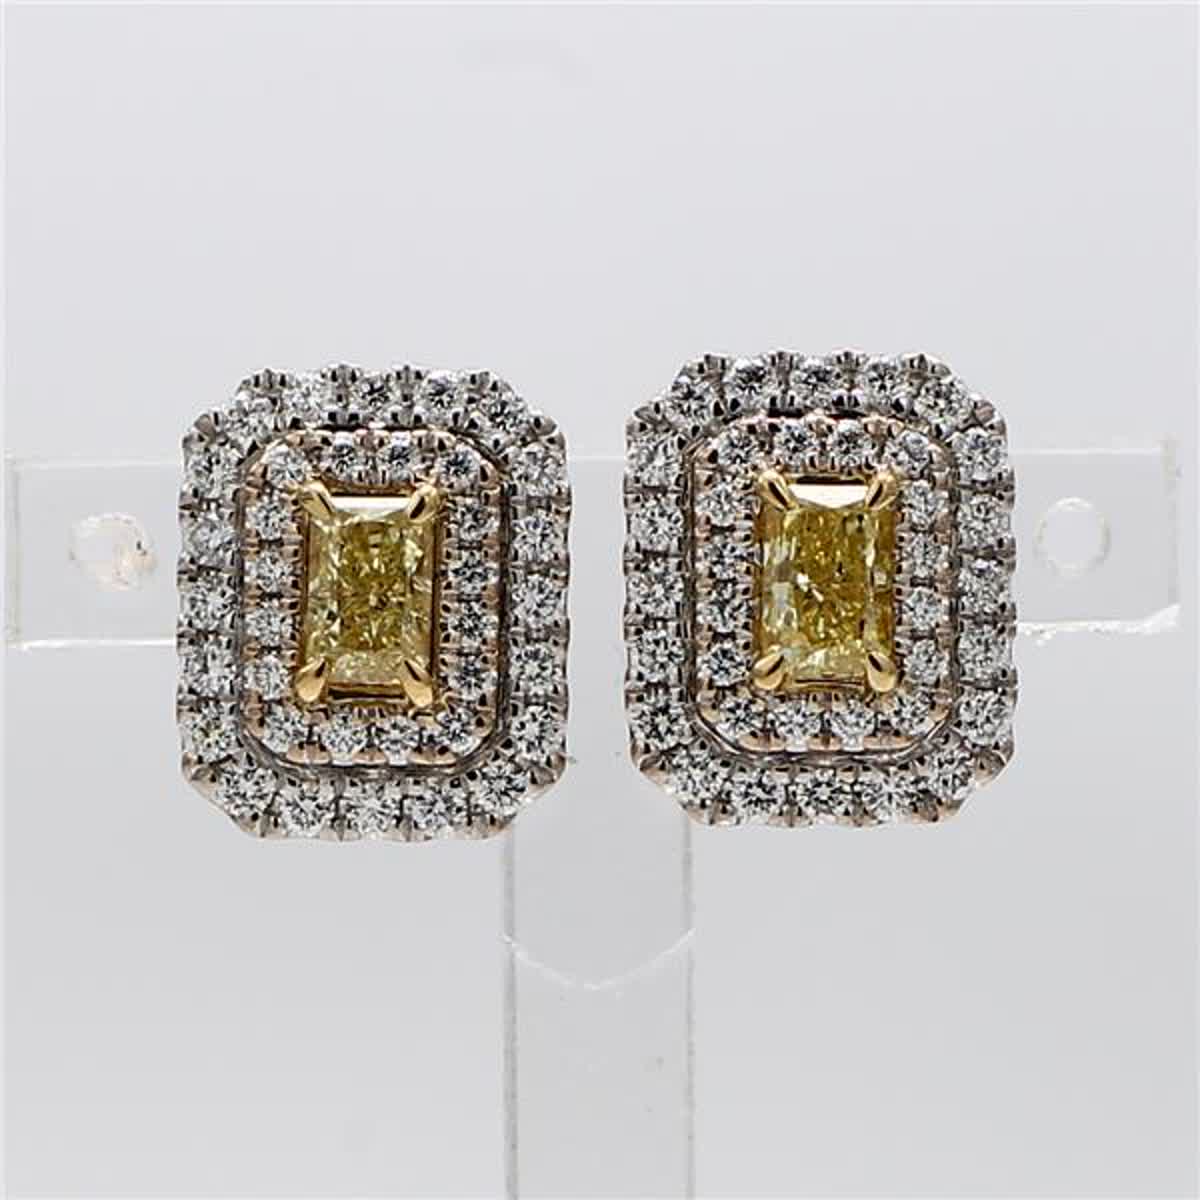 Natural Yellow Radiant and White Diamond 1.44 Carat TW Gold Stud Earrings